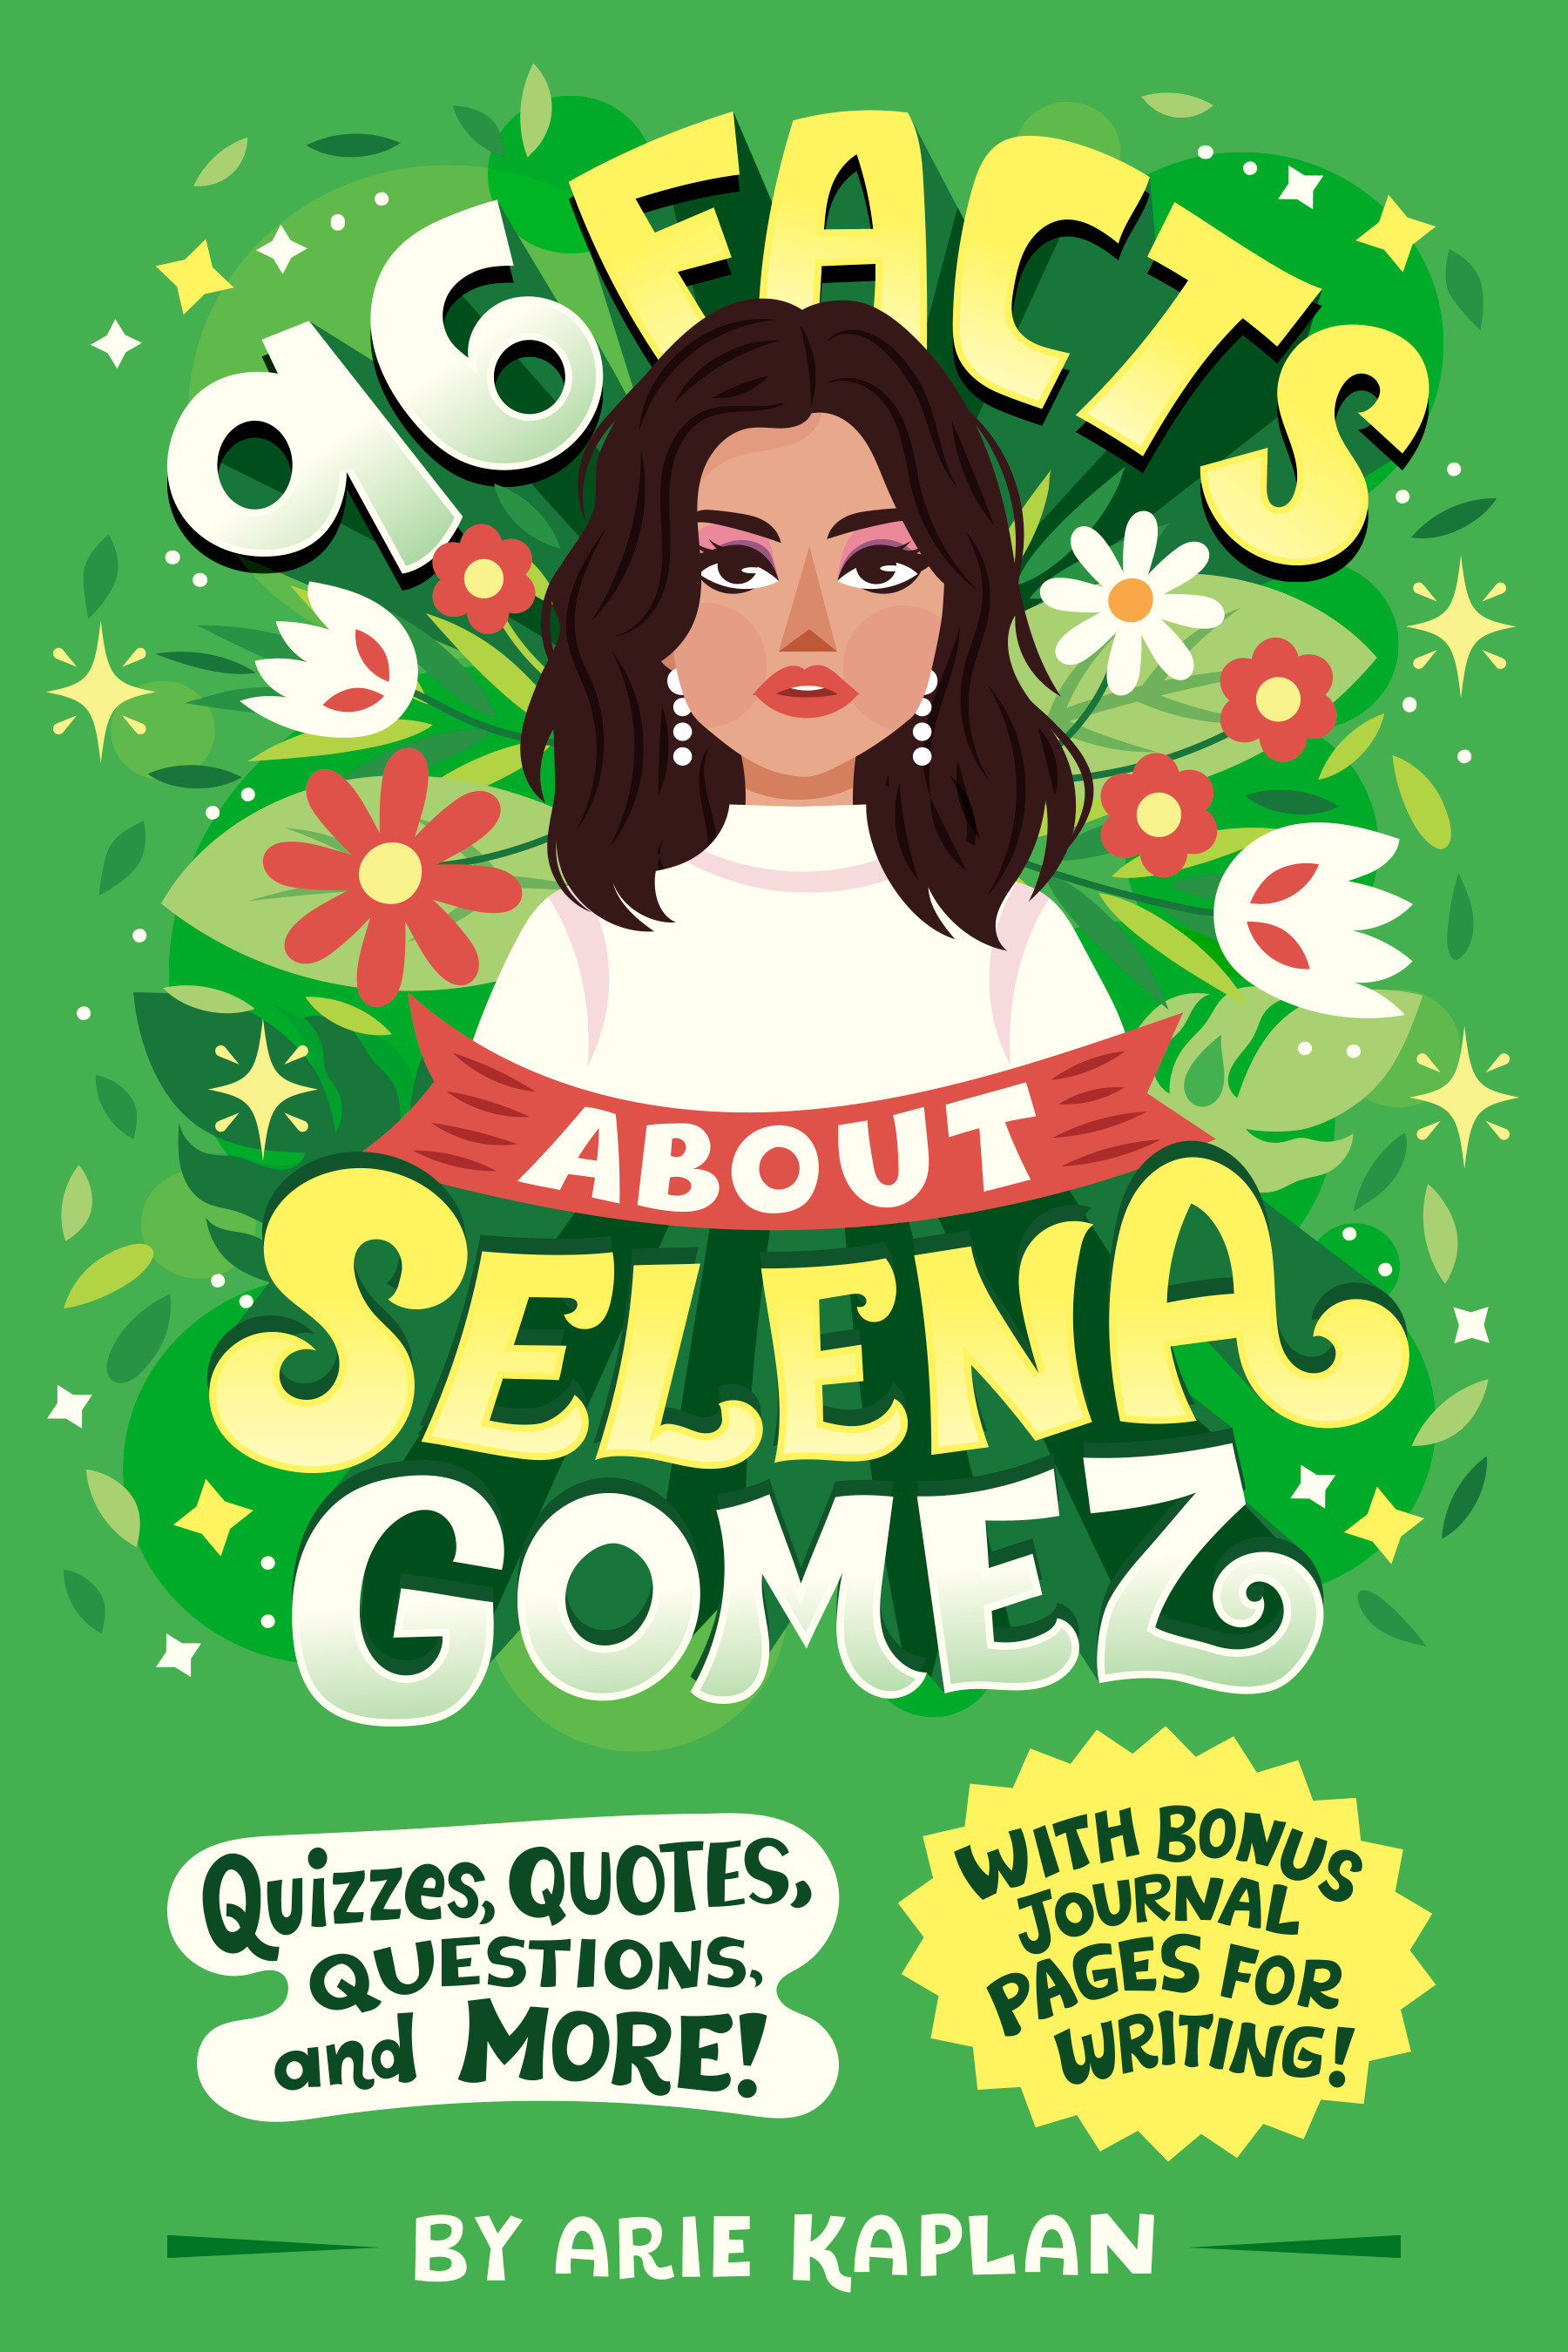 96 Facts About... Volume 1 Selena Gomez